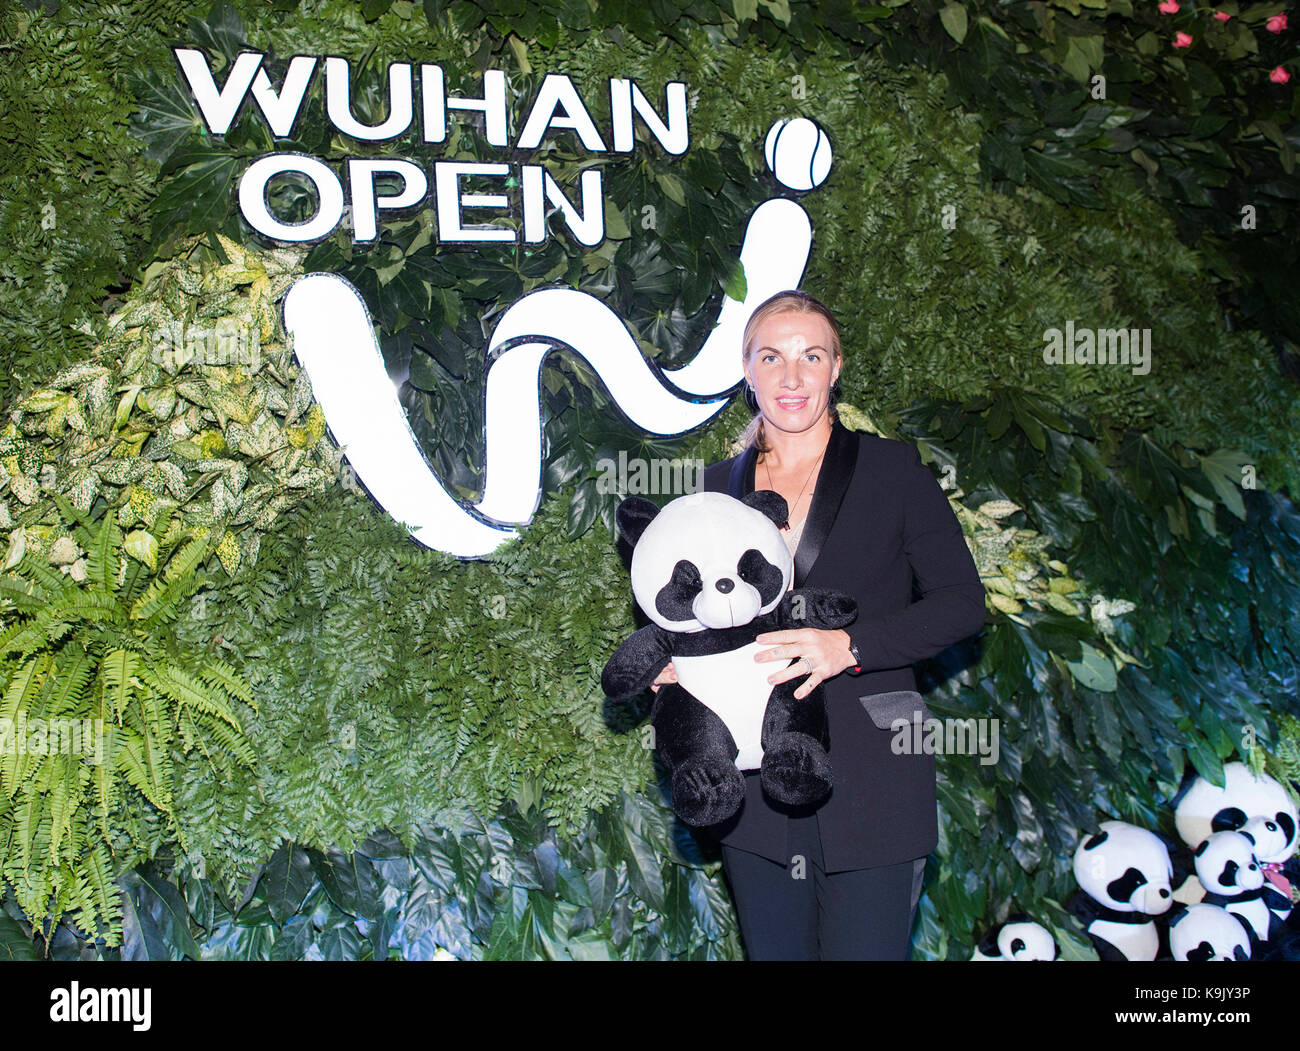 (170923) -- WUHAN, Sept. 23, 2017(Xinhua) -- Svetlana Kuznetsova of Russia arrives to attend the player party for 2017 WTA Wuhan Open in Wuhan, capital of central China's Hubei Province, on Sept. 23, 2017. (Xinhua/Xiao Yijiu)(wll) Stock Photo